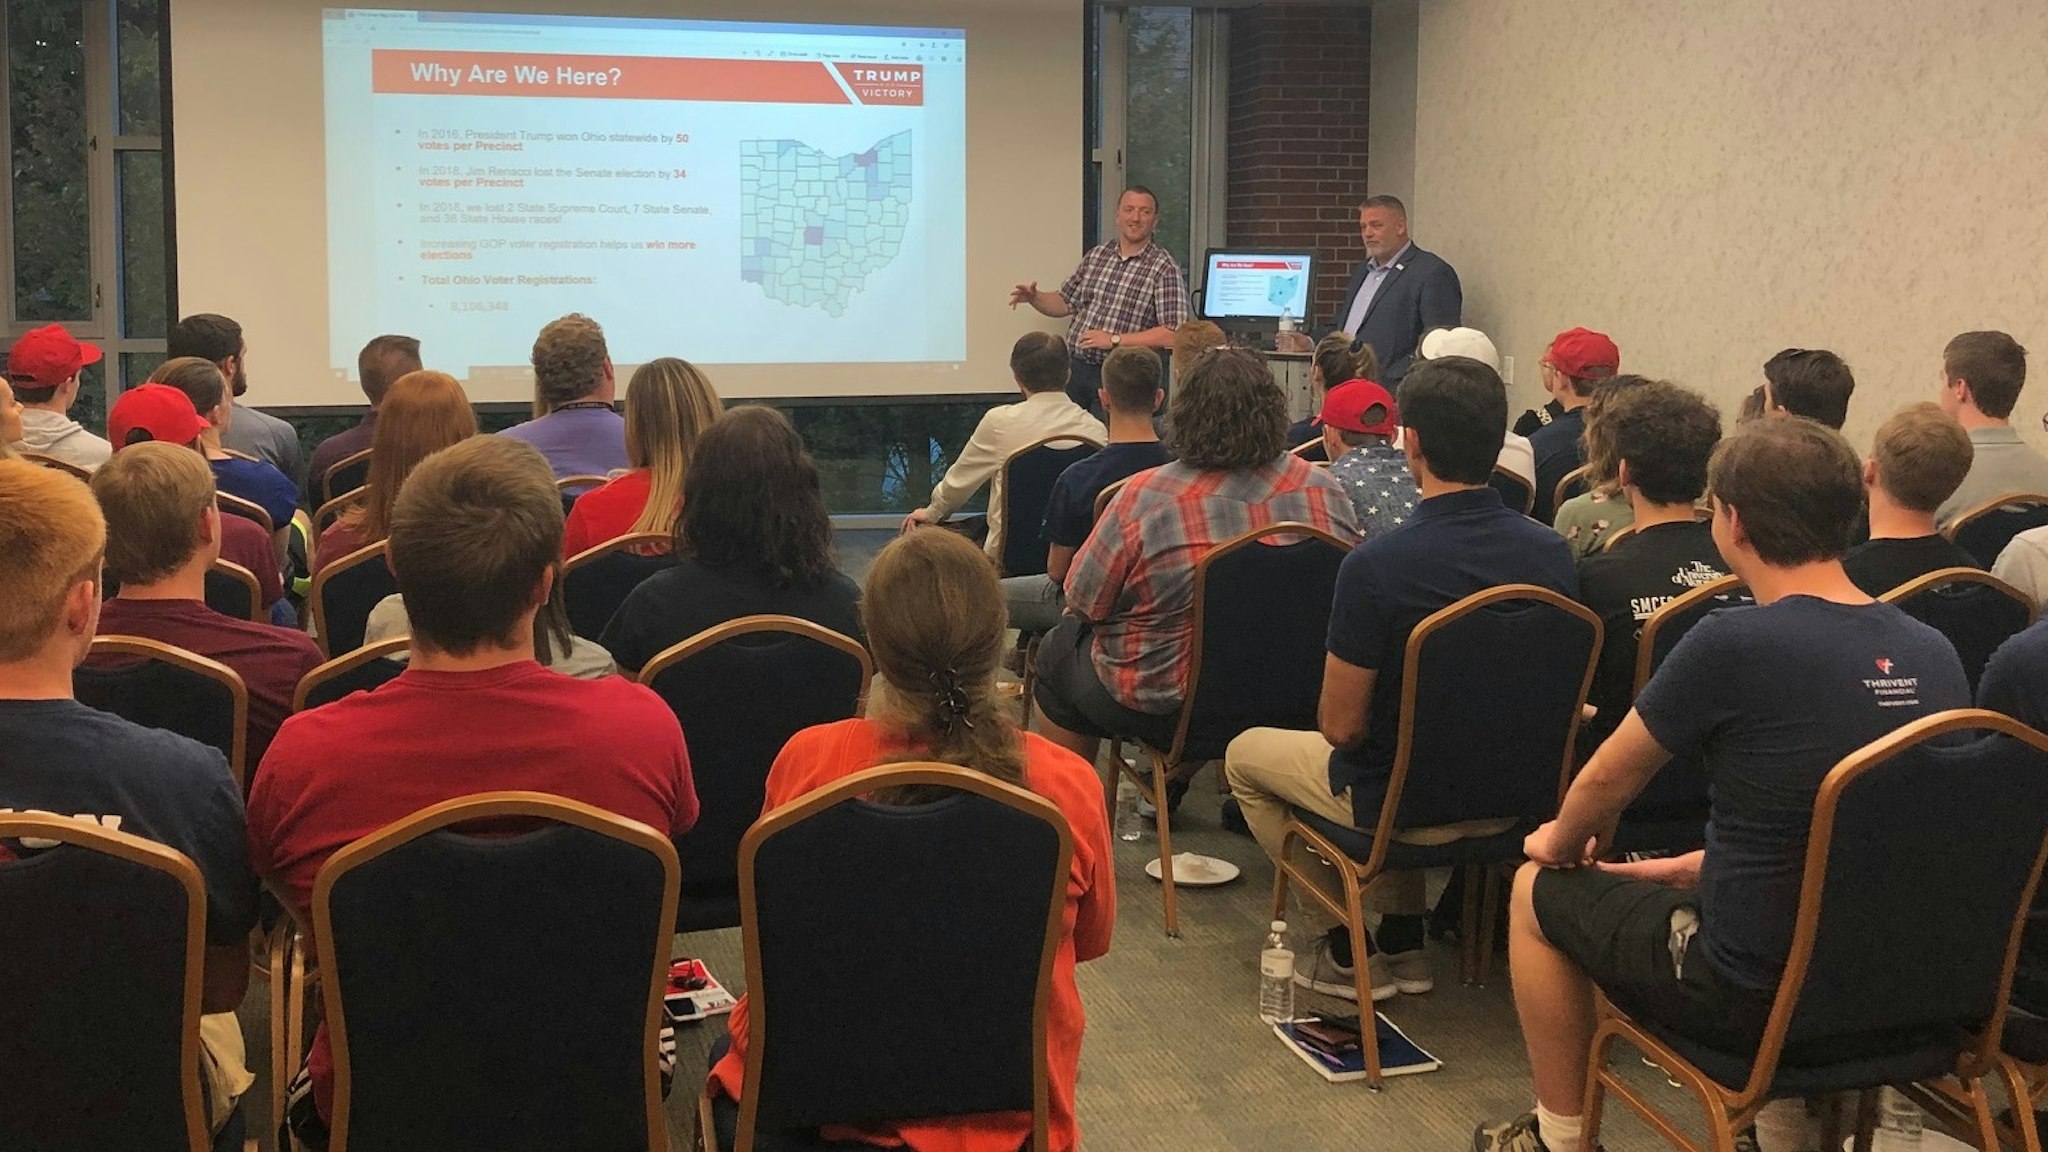 Trump Victory hosted a training and recruitment session for college conservatives to help re-elect President Donald Trump in 2020